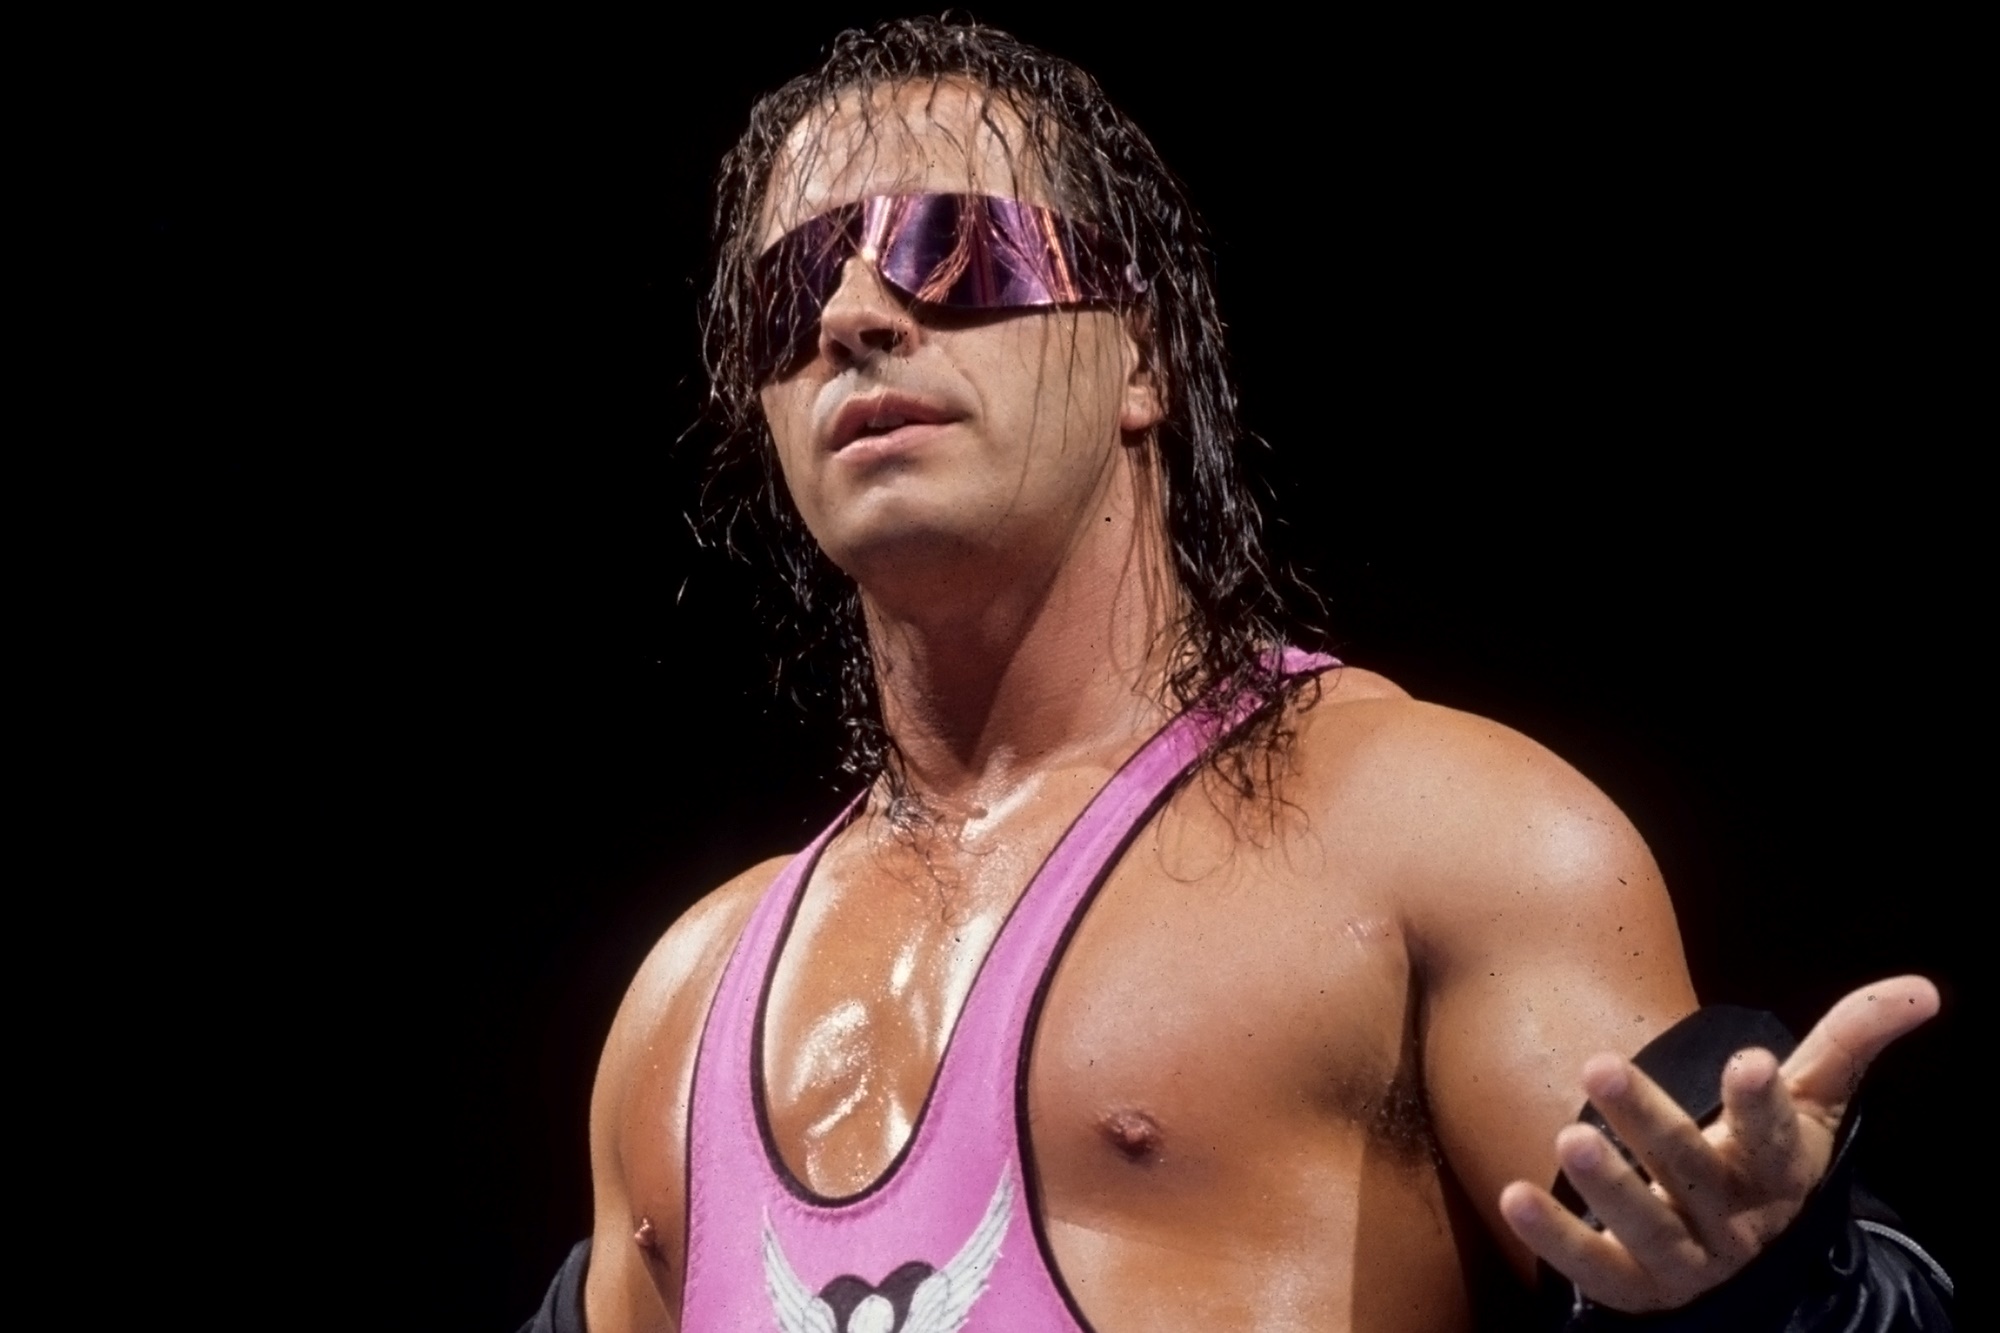 13 Facts About Bret Hart - Facts.net